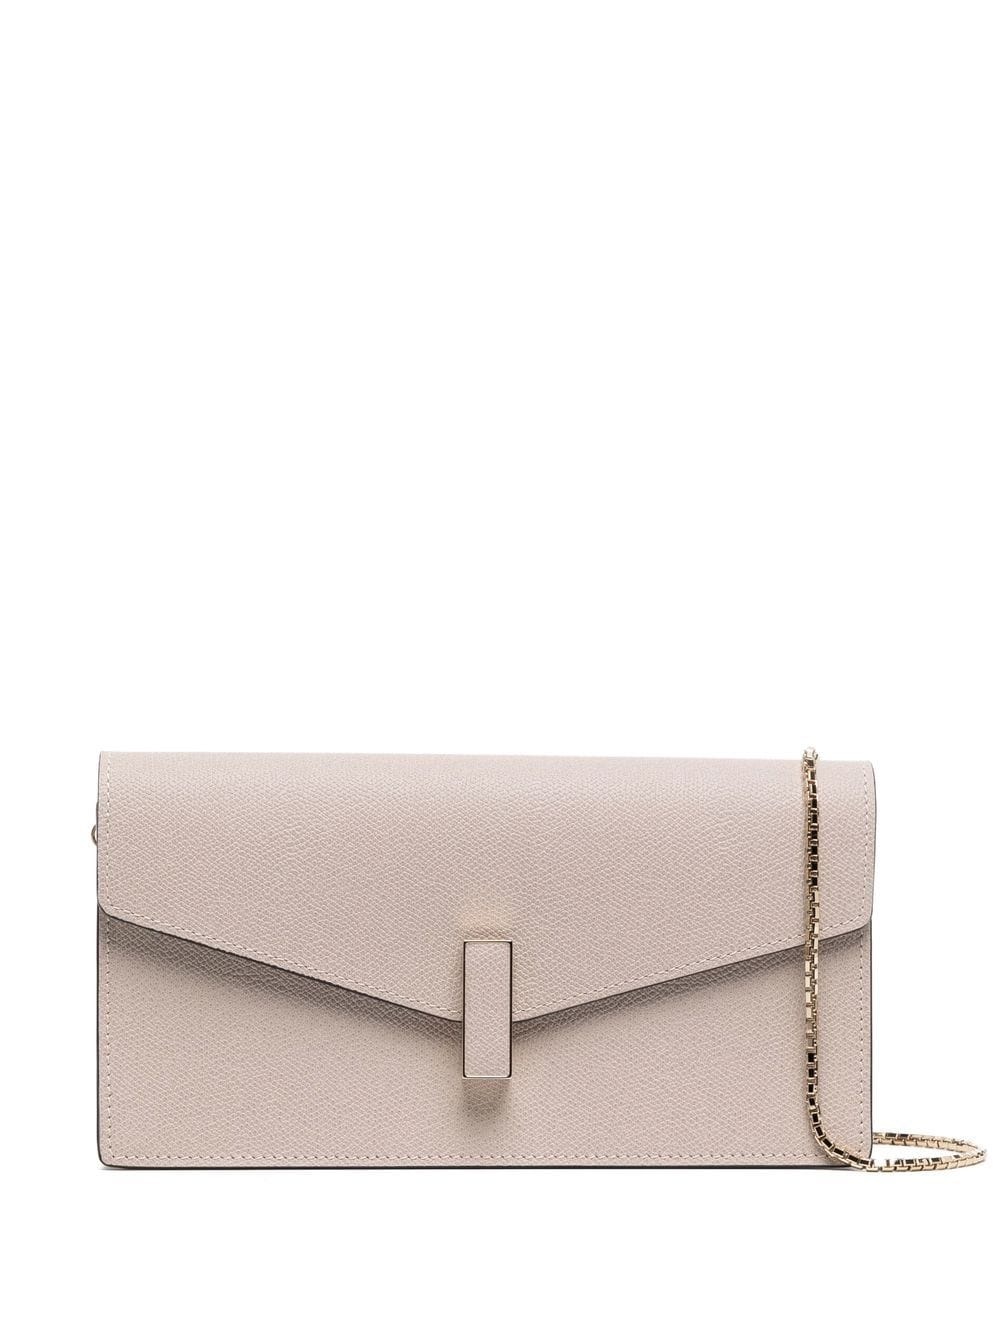 Iside leather clutch bag - 1